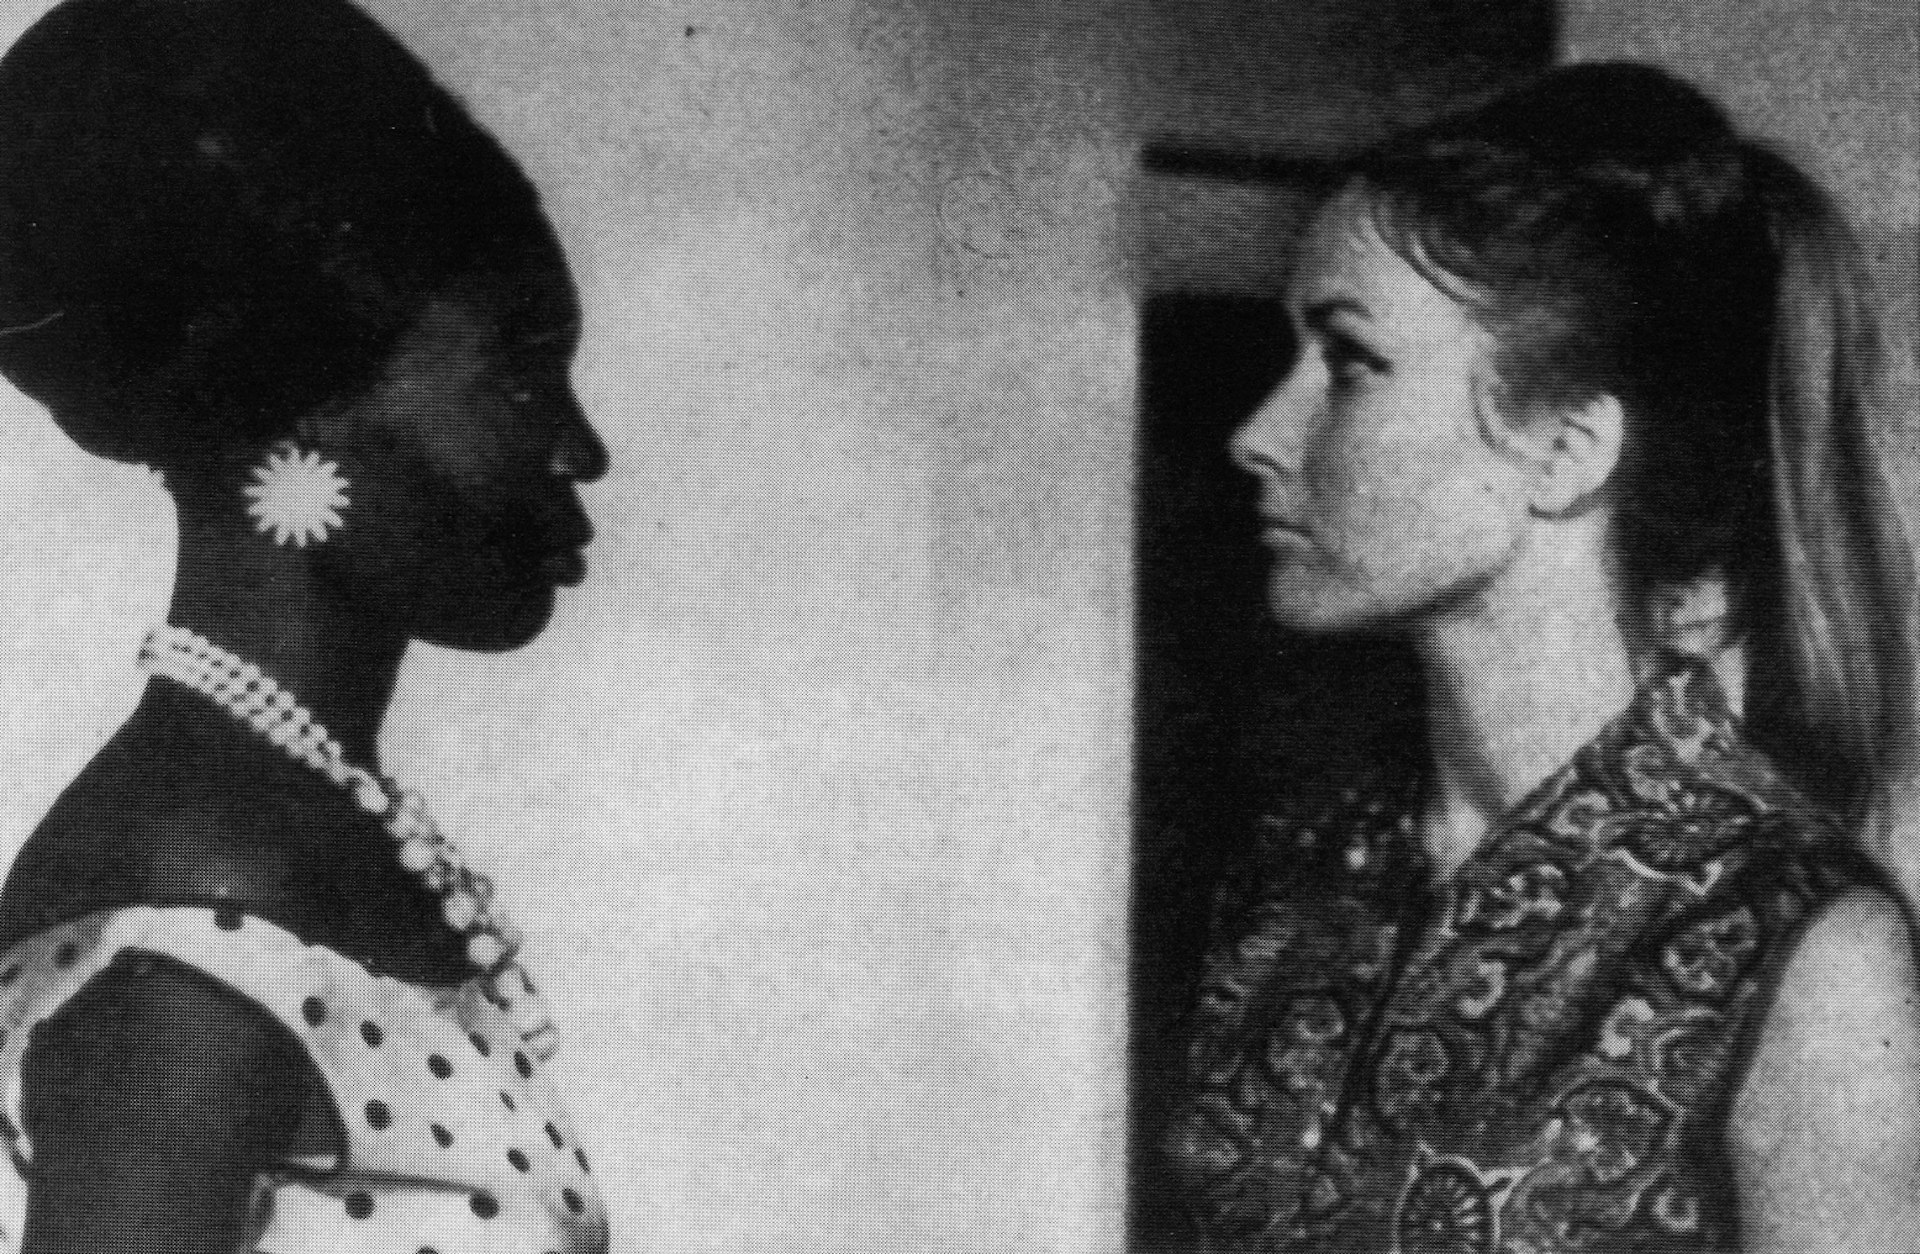 Dispatches from Cannes: Ousmane Sembene's Films Are Being Digitally Restored